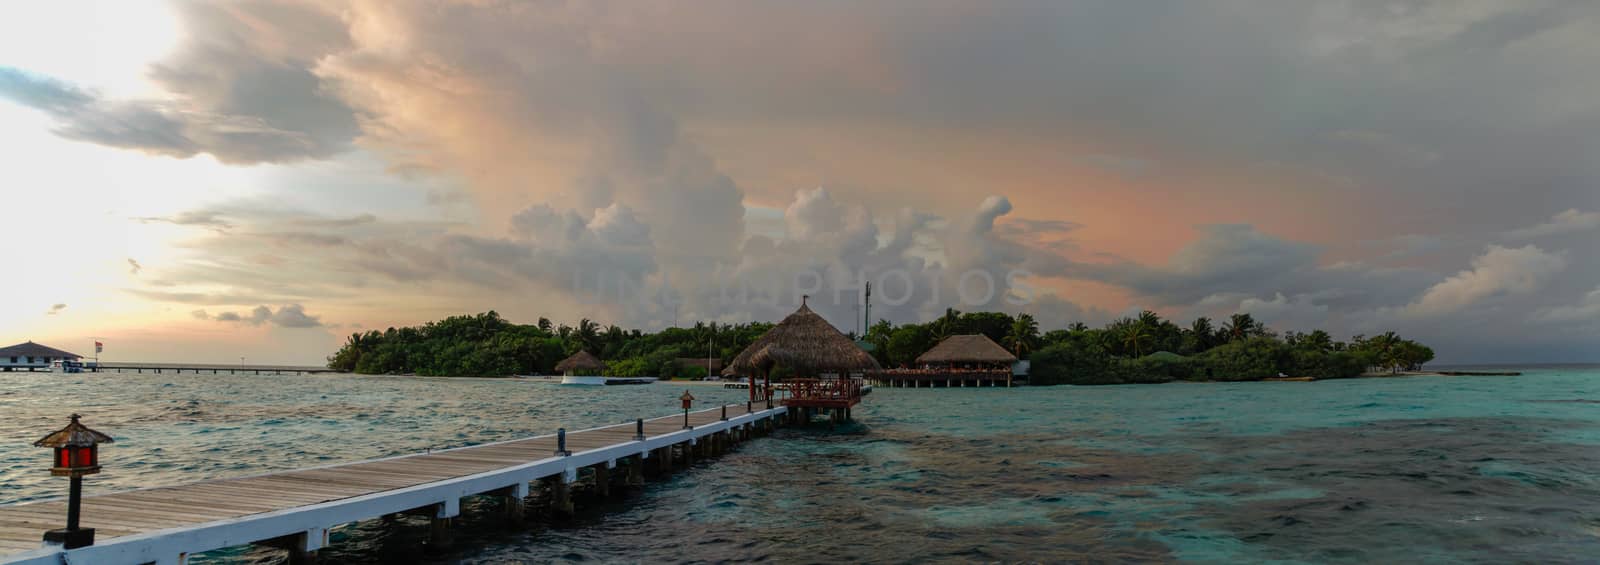 Maldives, a view from the bridge to the island, sunset by 25ehaag6